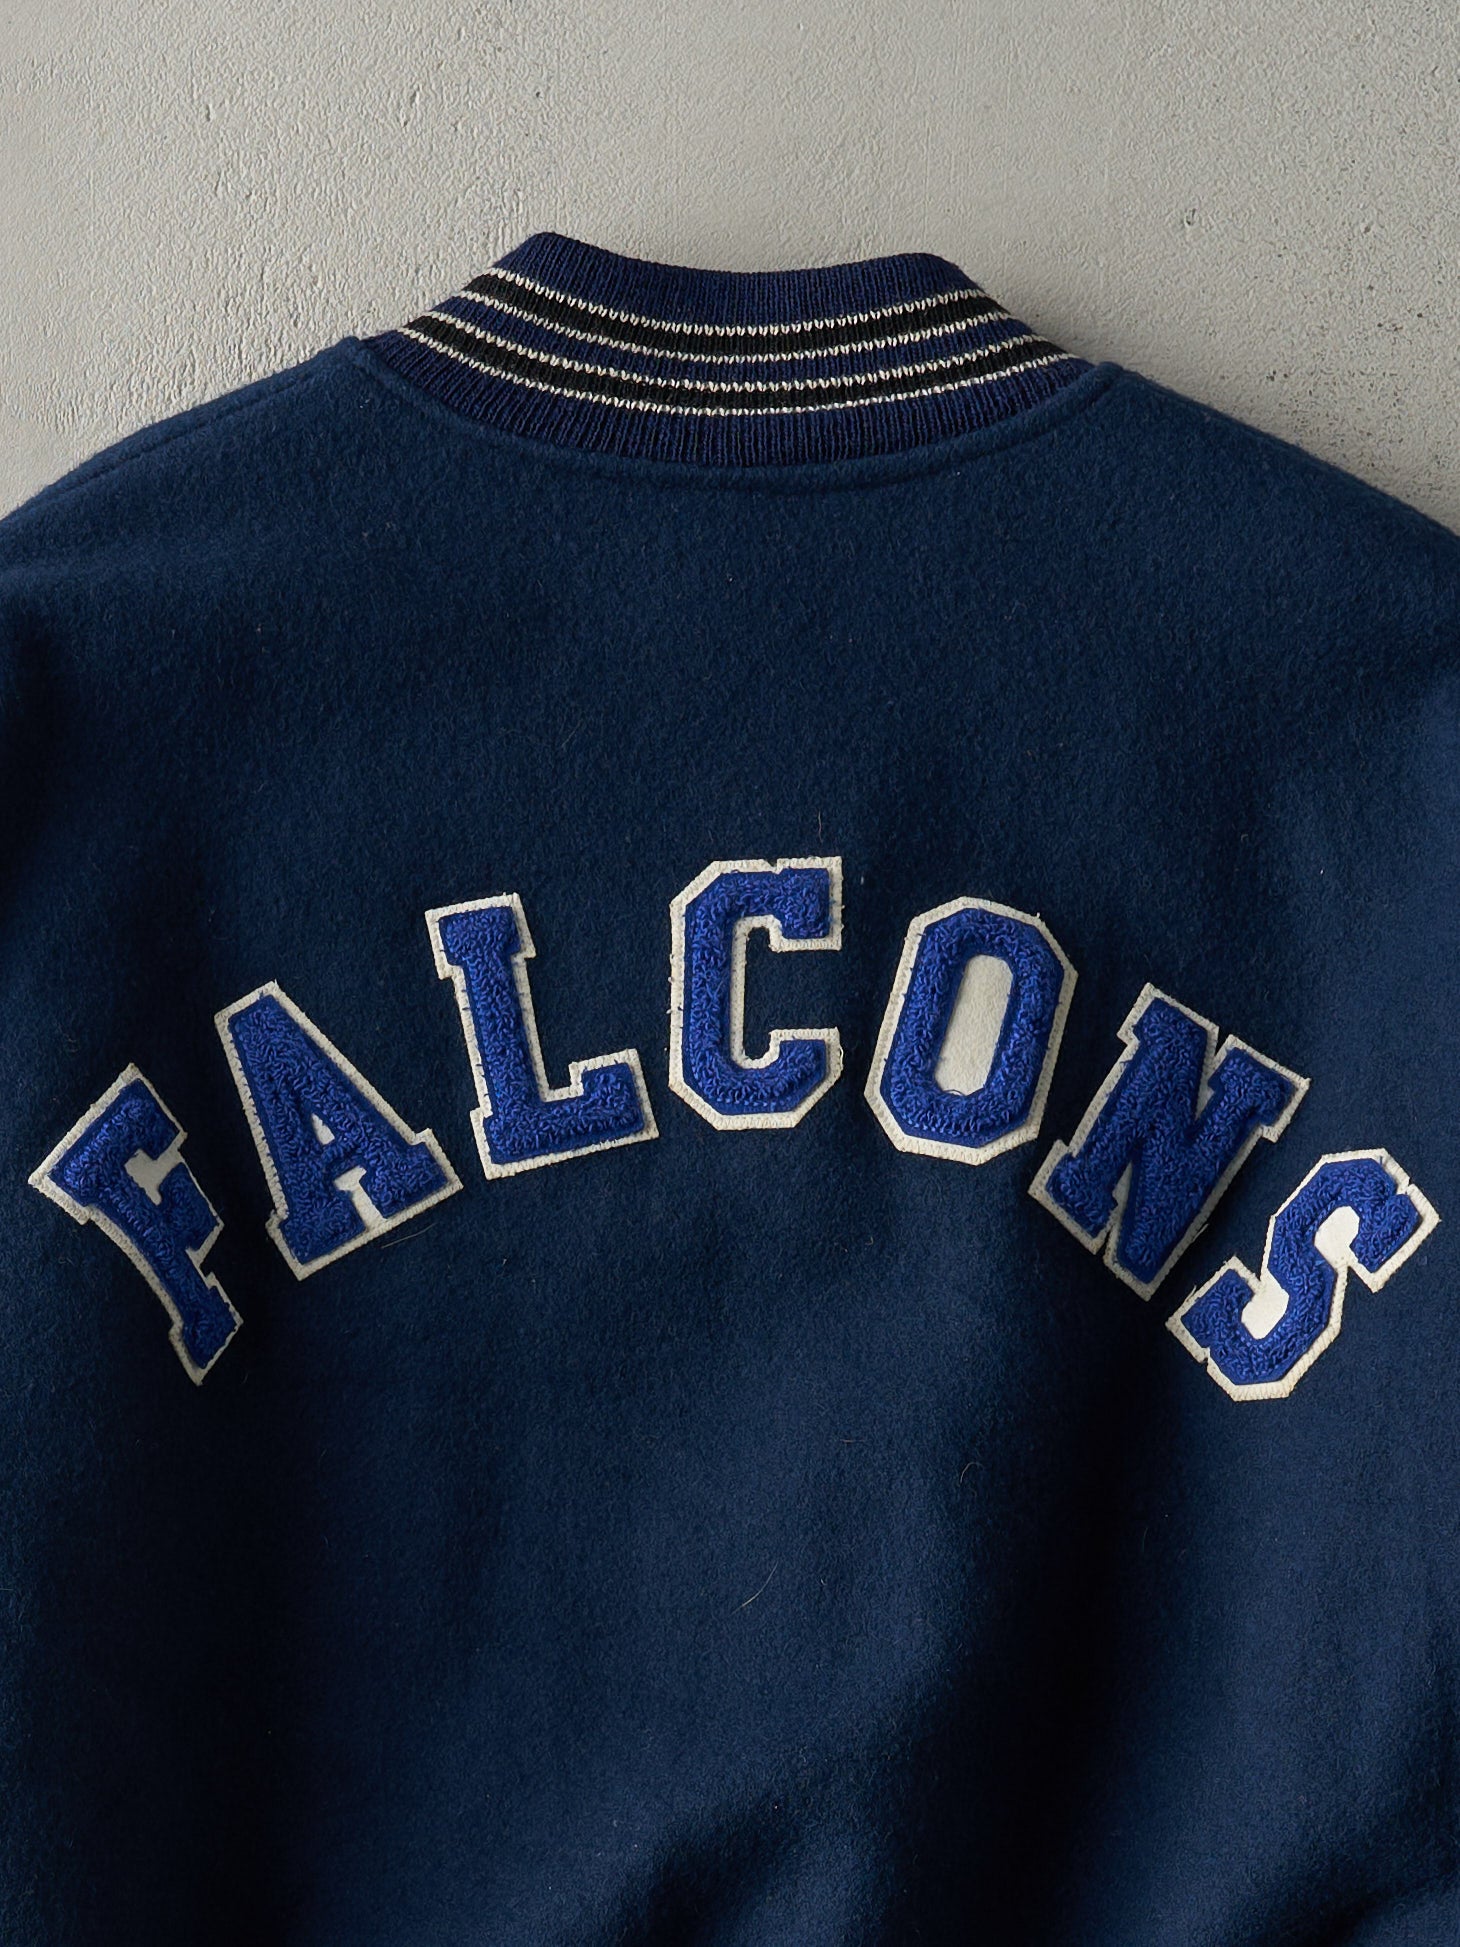 Vintage 98' Navy and White Falcons Boxy Letterman Jacket (L)